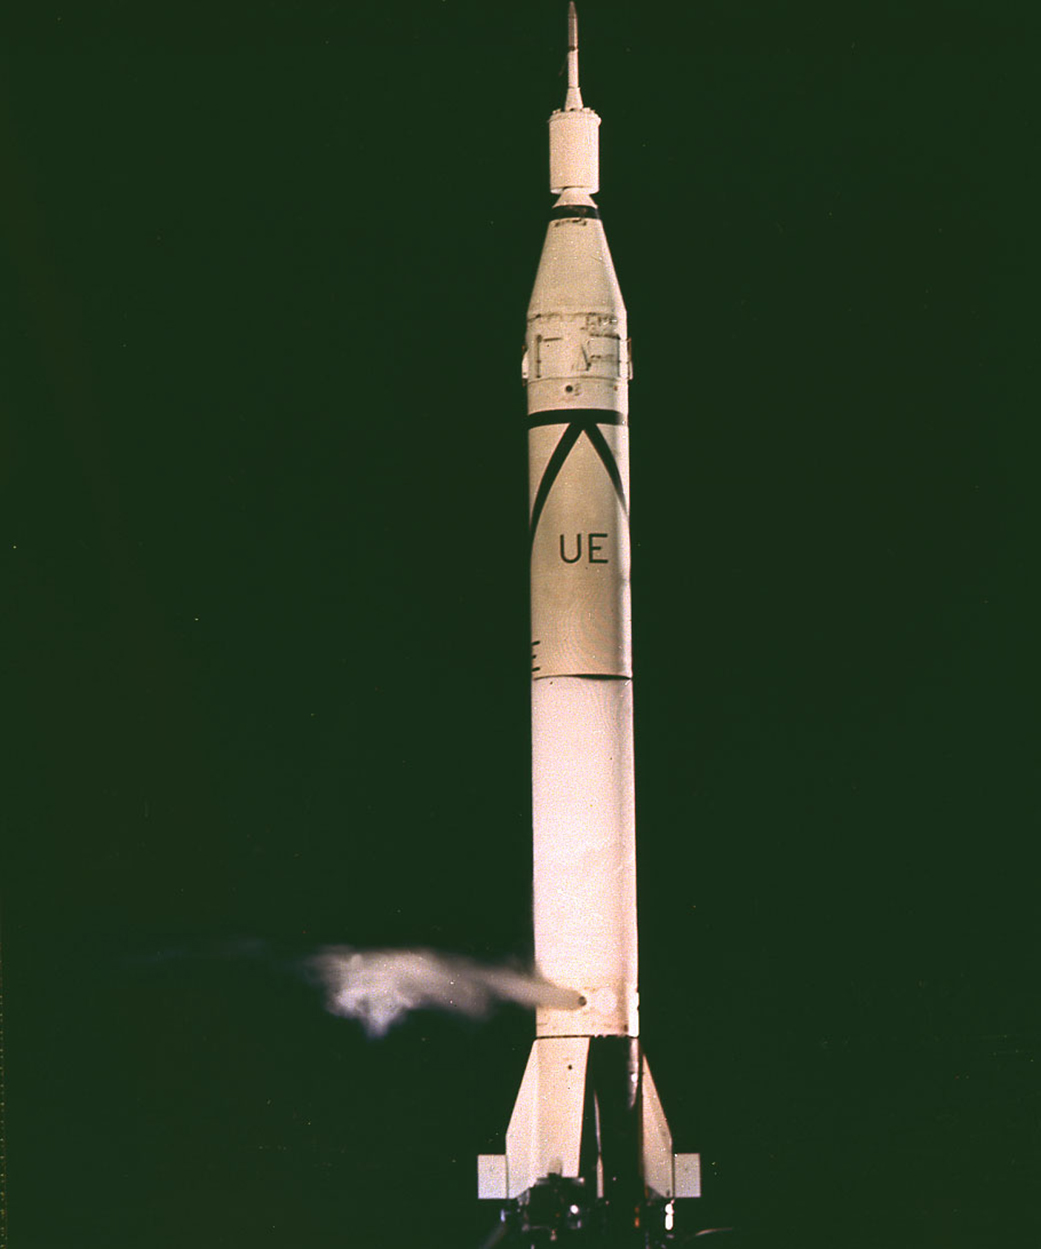 Jupiter-C launch vehicle shortly before the January 31, 1958 launch of America's first satellite, Explorer I. 